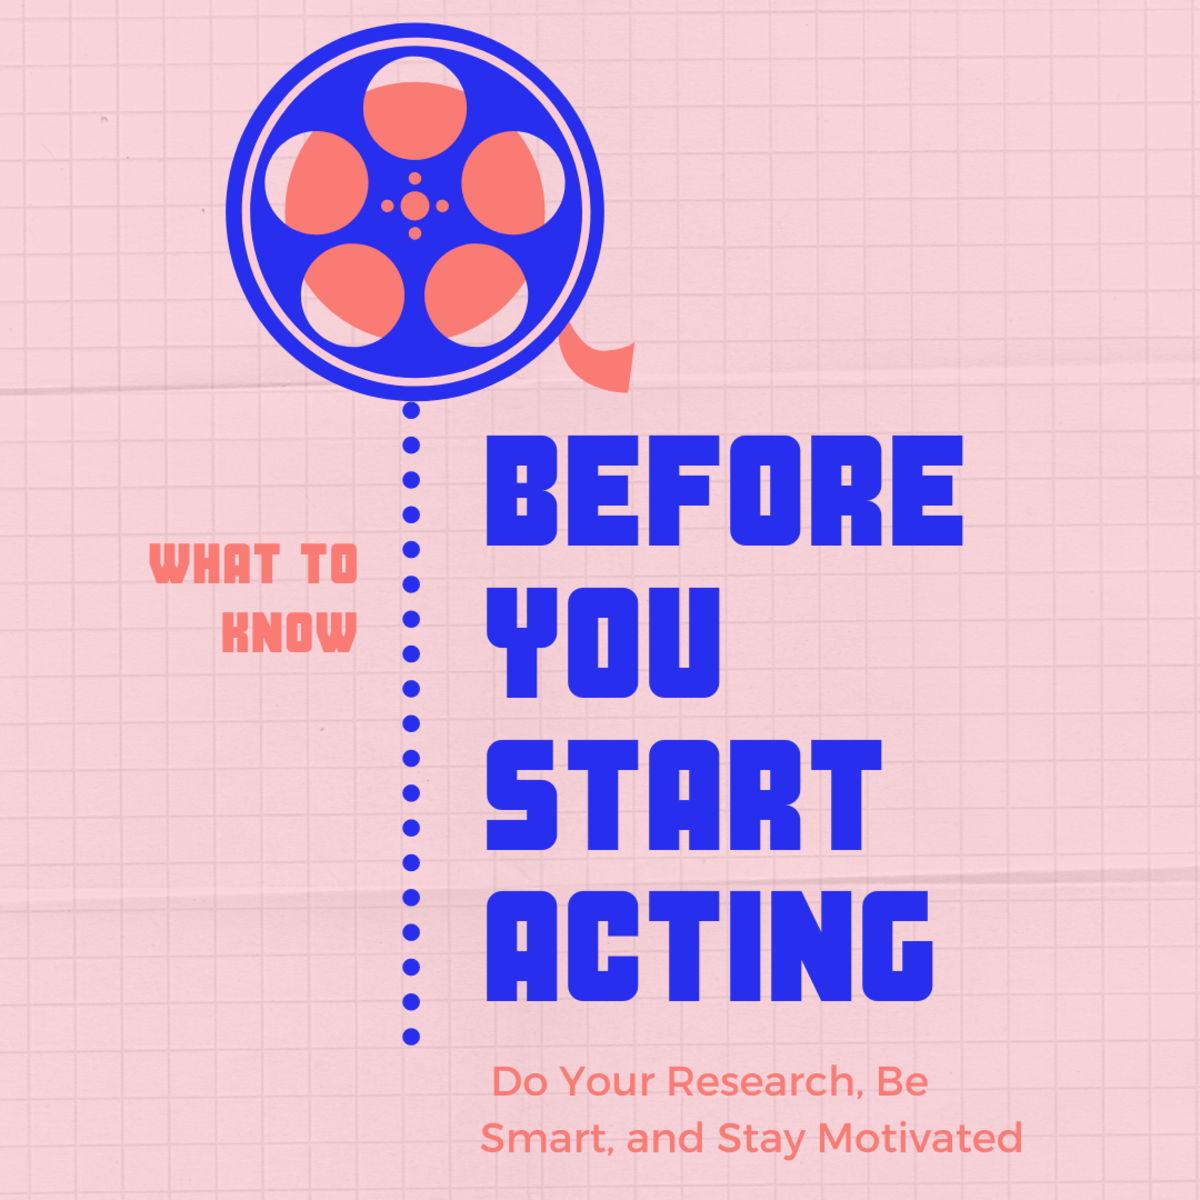 Five Things You Should Know Before Getting Started in the Acting Industry